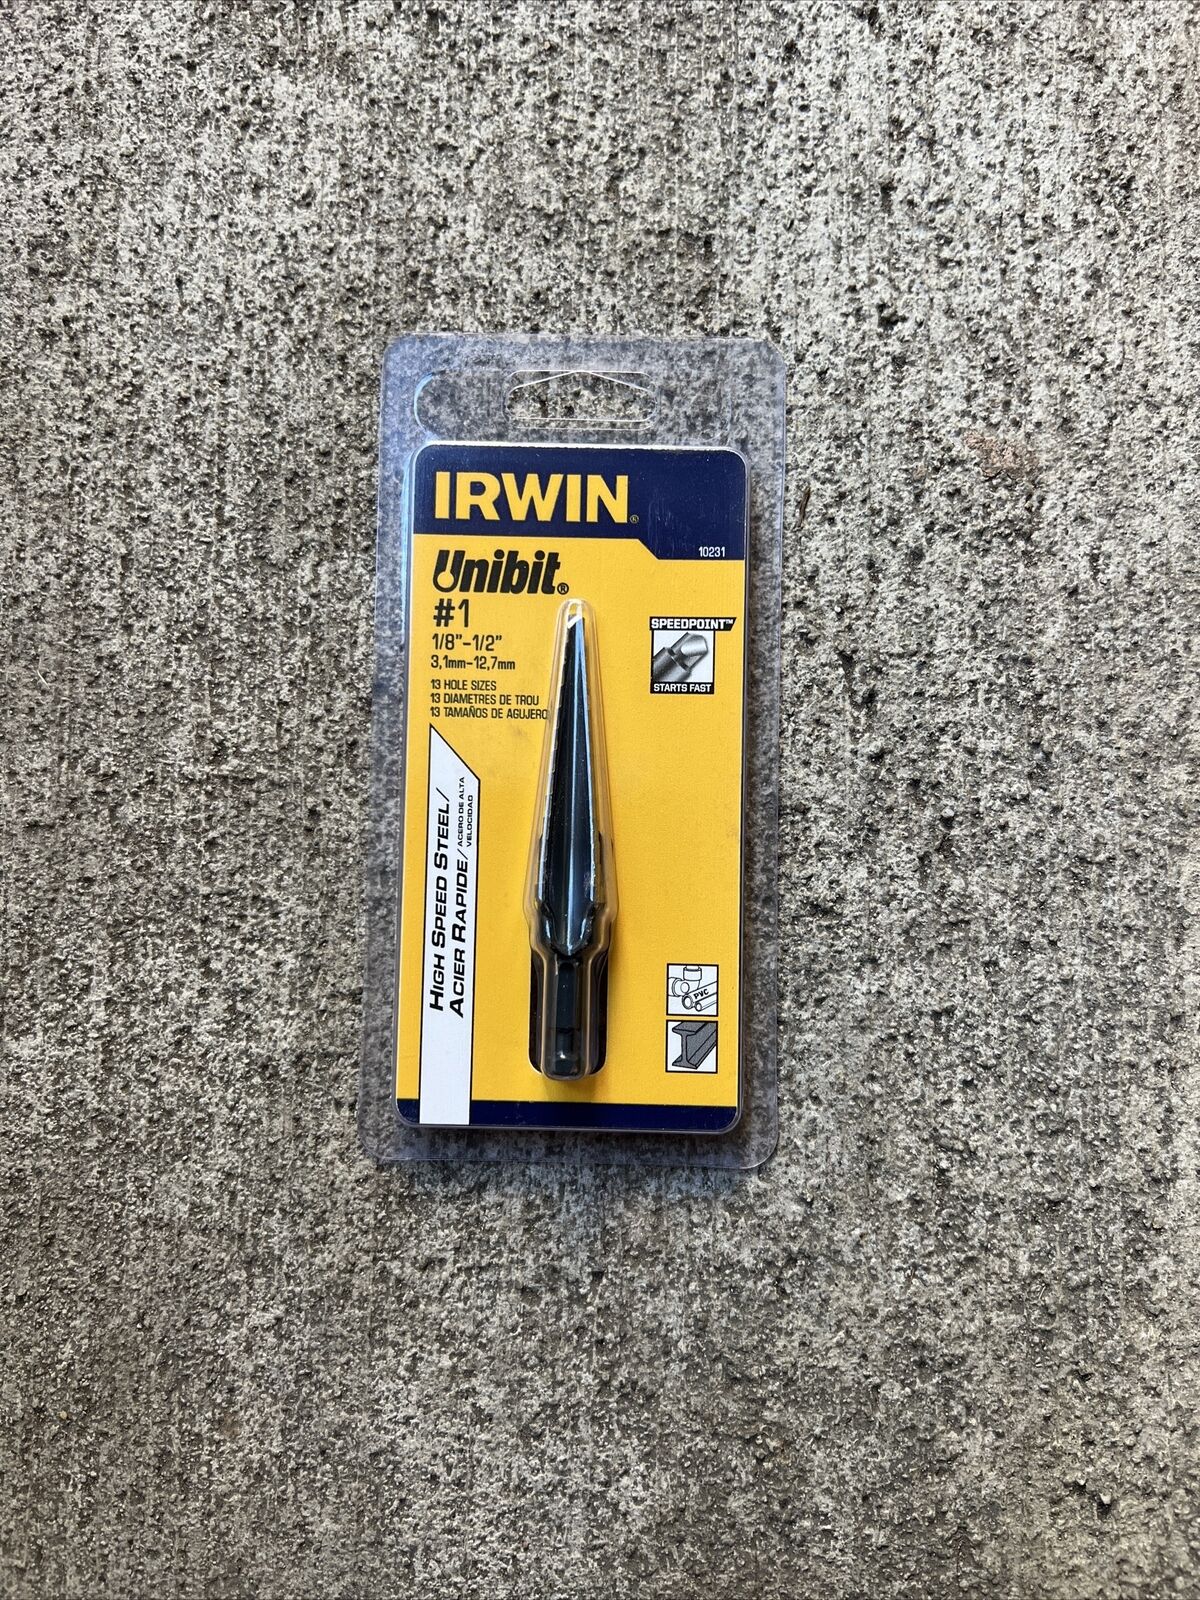 Irwin 10231 Unibit #1 Step Drill 1/8 to 1/2-Inch  13 sizes USA Made